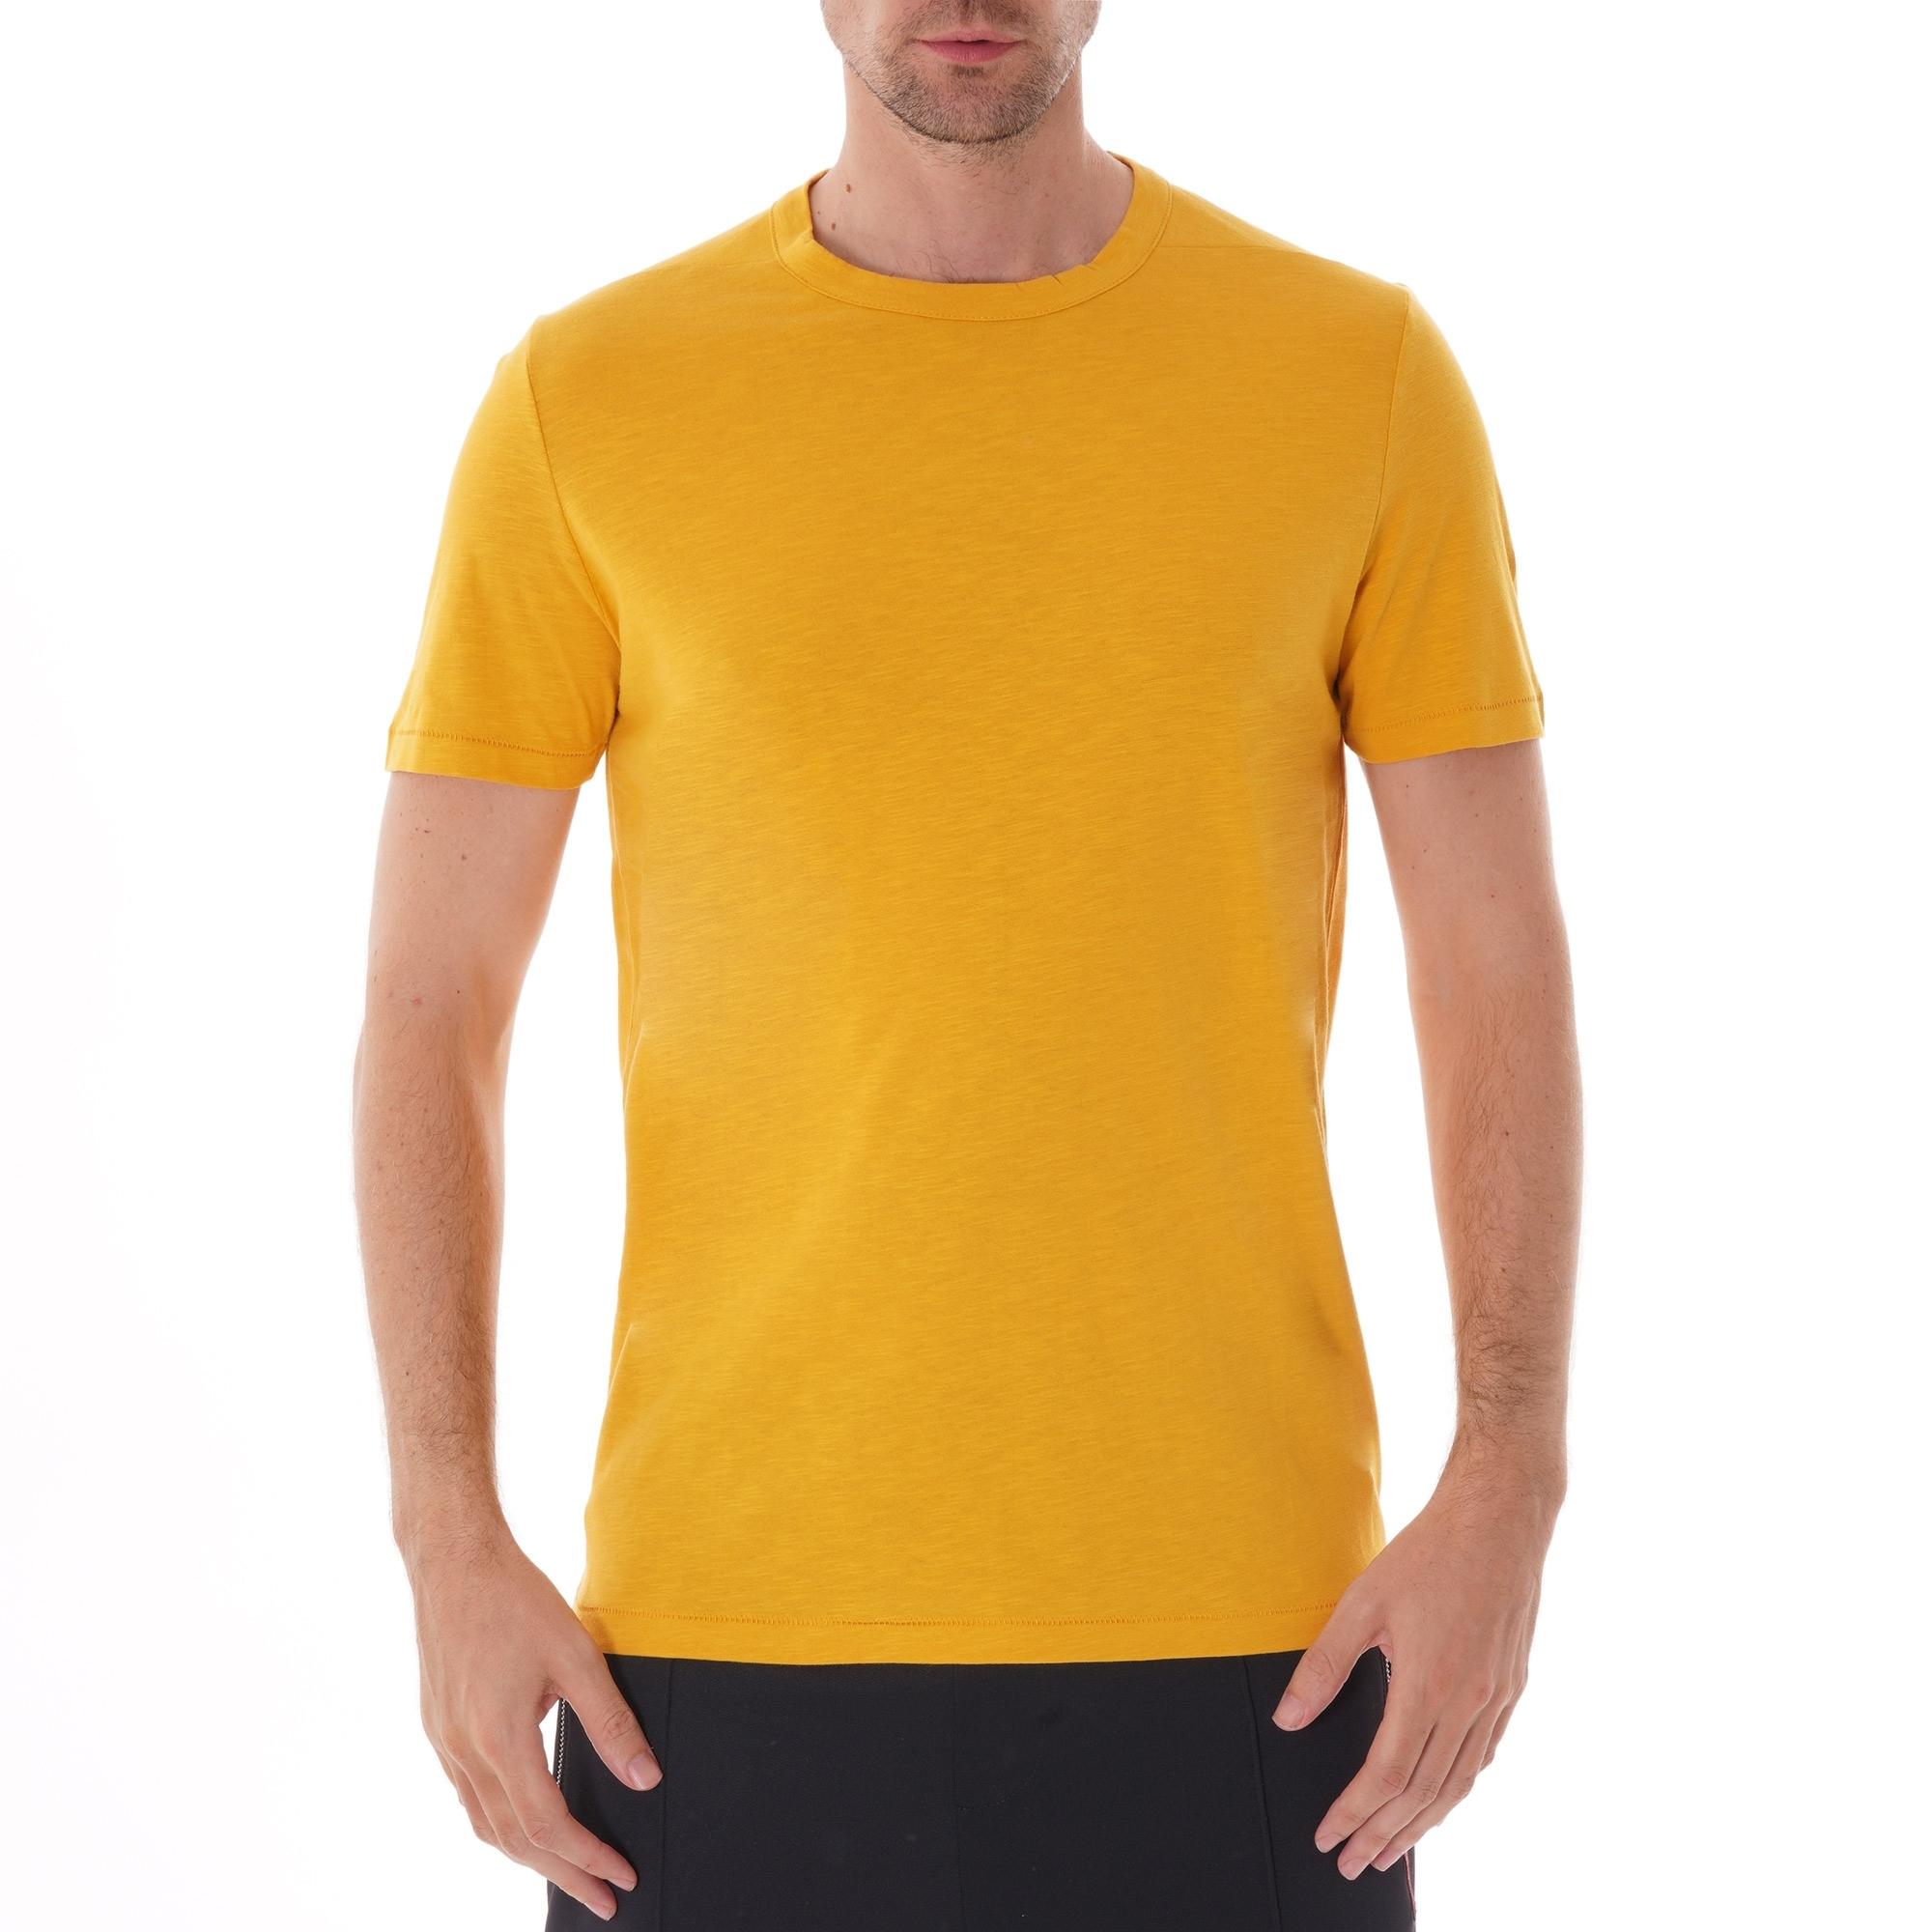 Homecore Cotton Rodger Tee in Yellow for Men - Lyst